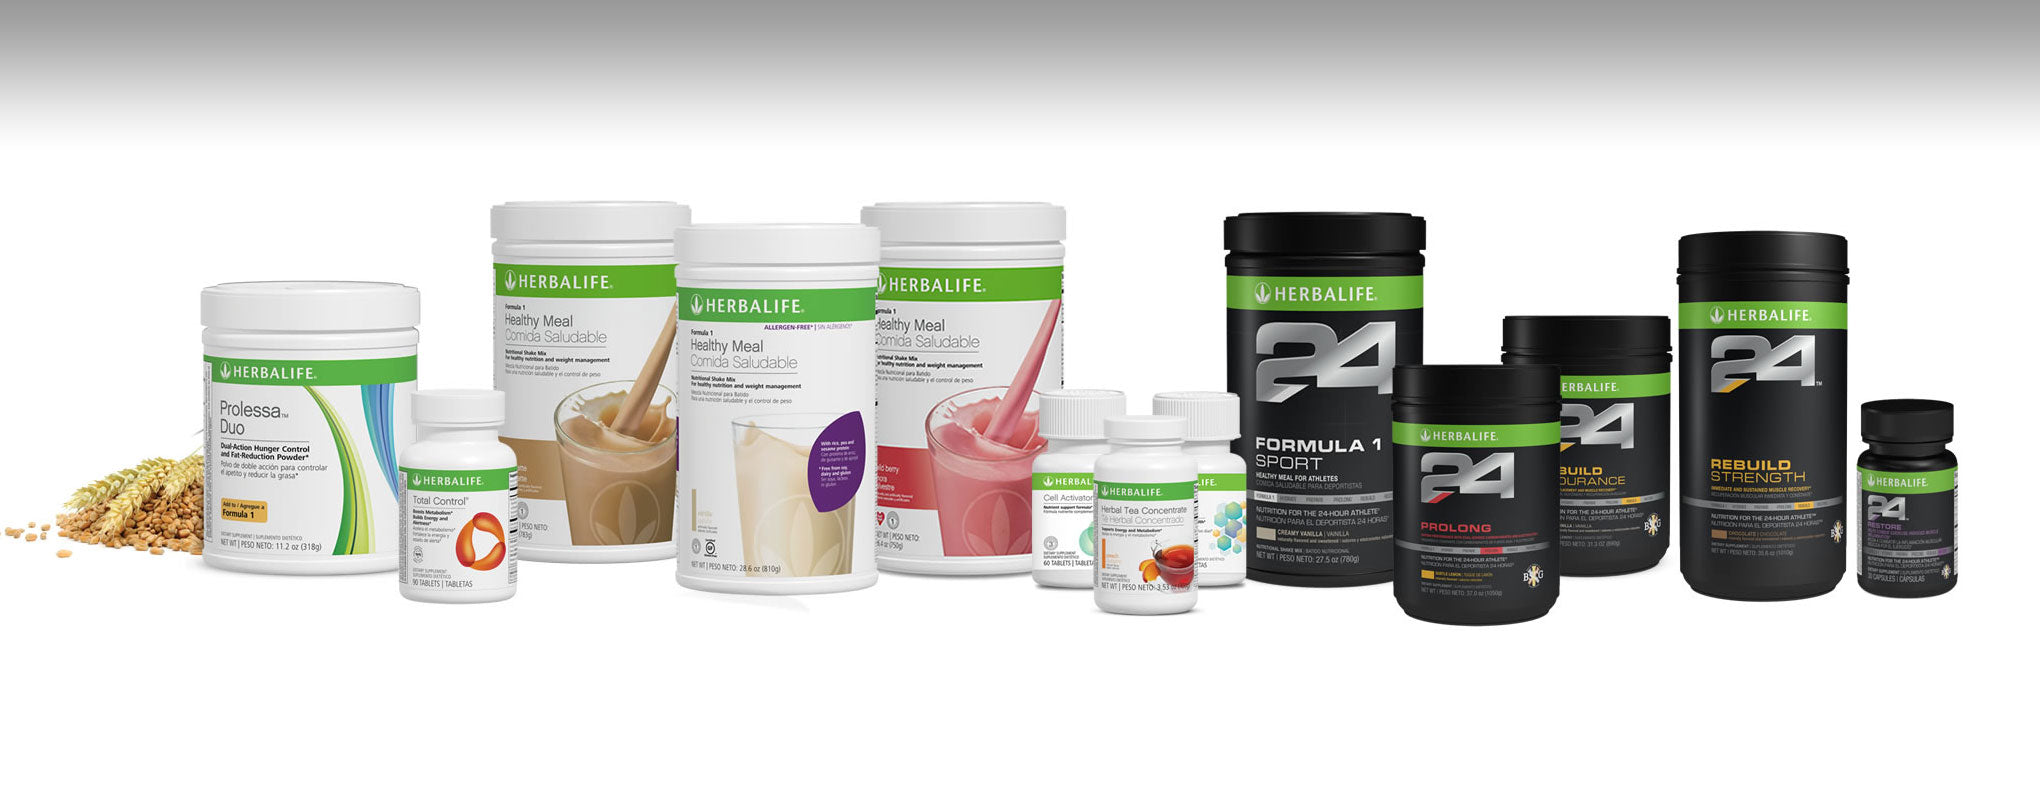 Formula 1 Healthy Meal Nutritional Shake Mix, Allergen-Free - Herbalife  Prices